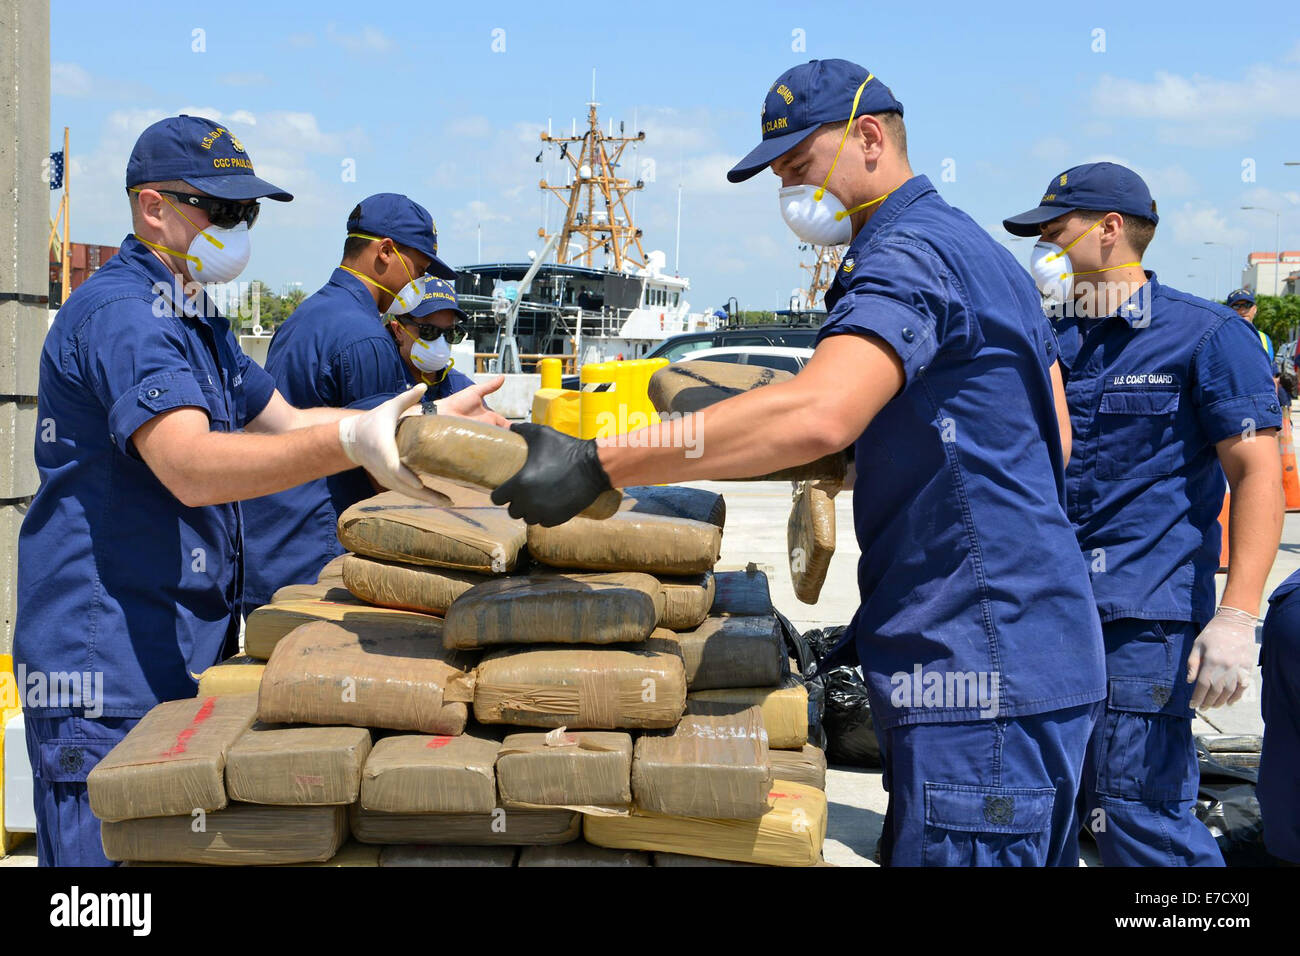 The crew of the U.S. Coast Guard Cutter Paul Clark offloads an estimated 2,100 pounds of marijuana and 35 kilograms of cocaine worth a combined wholesale value of more than $3 million September 5, 2014 in Miami Beach, Florida. Stock Photo